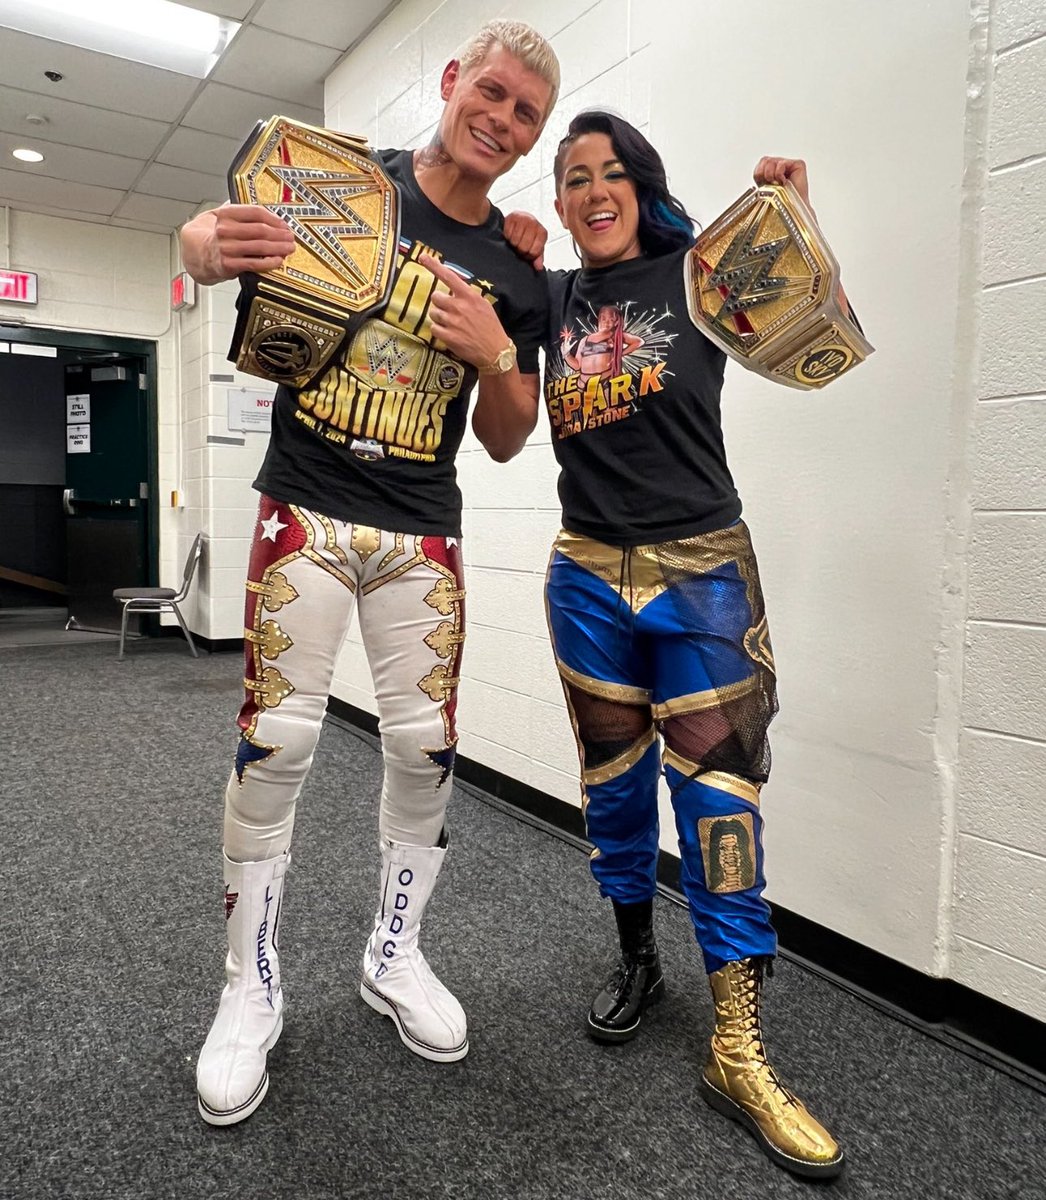 #WWERaw follow train (this is a special one)

-Like/RT
-I FOLLOW BACK ALWAYS!
-Drop your favorite match from #WrestleMania weekend ( #StandAndDeliver counts) or any wrestling event this weekend in the comments/qt's

Mine is Bayley/Iyo, Roman/Cody, and Dijak/Briggs/Femi